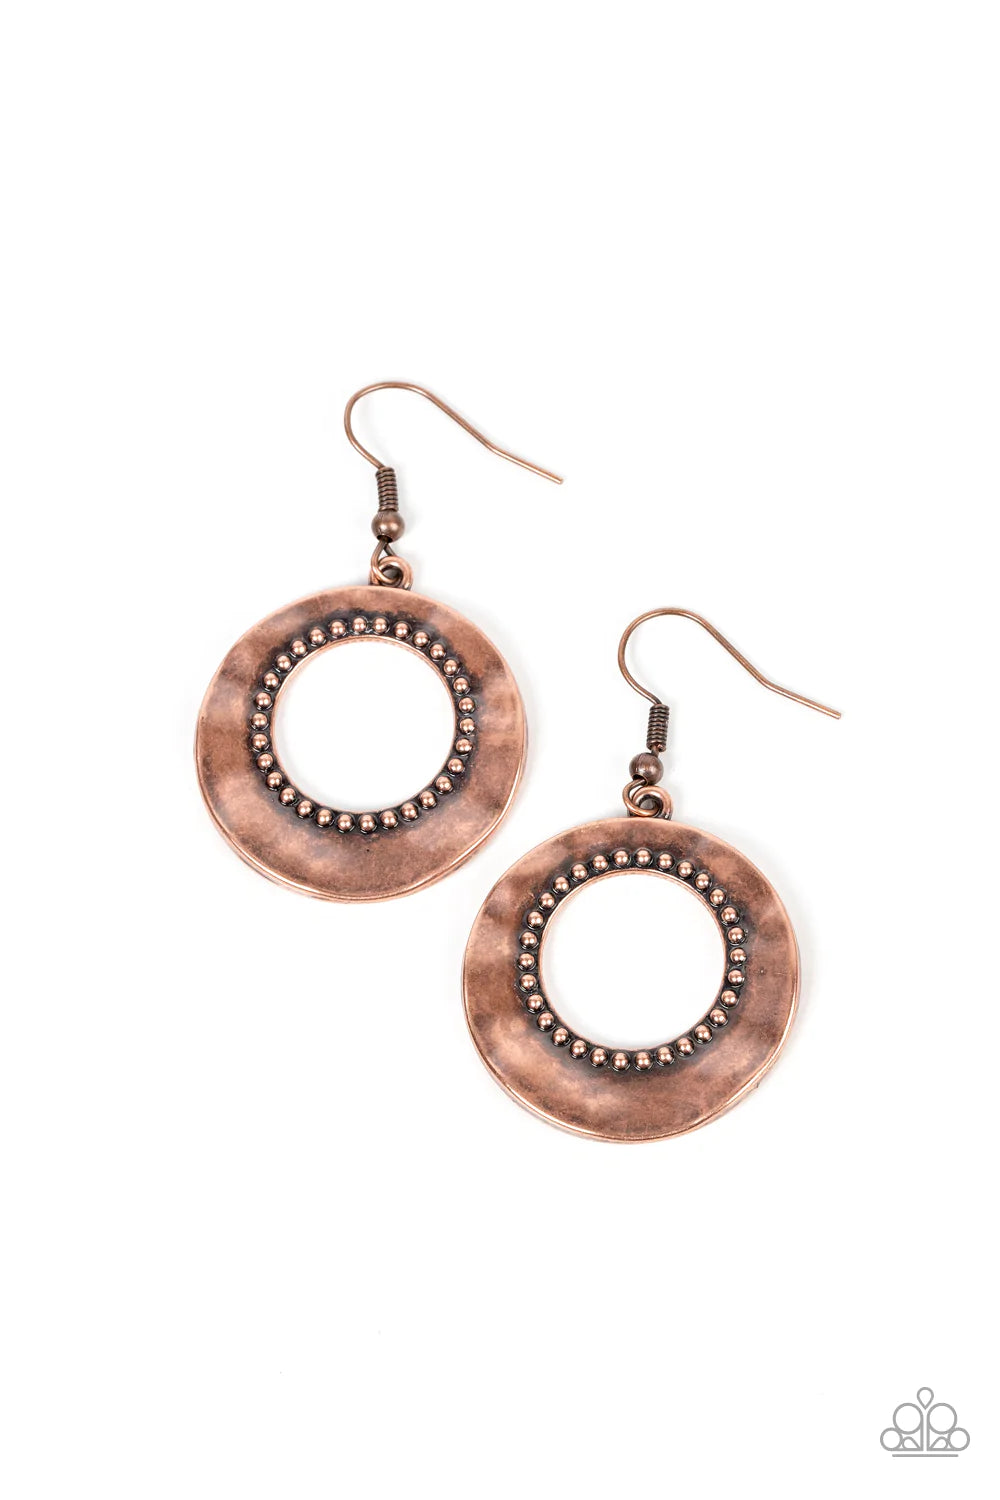 Paparazzi Accessories Desert Diversity - Copper Brushed in a burnished finish, a warped copper disc ripples around a studded copper center for a rustic flair. Earring attaches to a standard fishhook fitting. Sold as one pair of earrings.